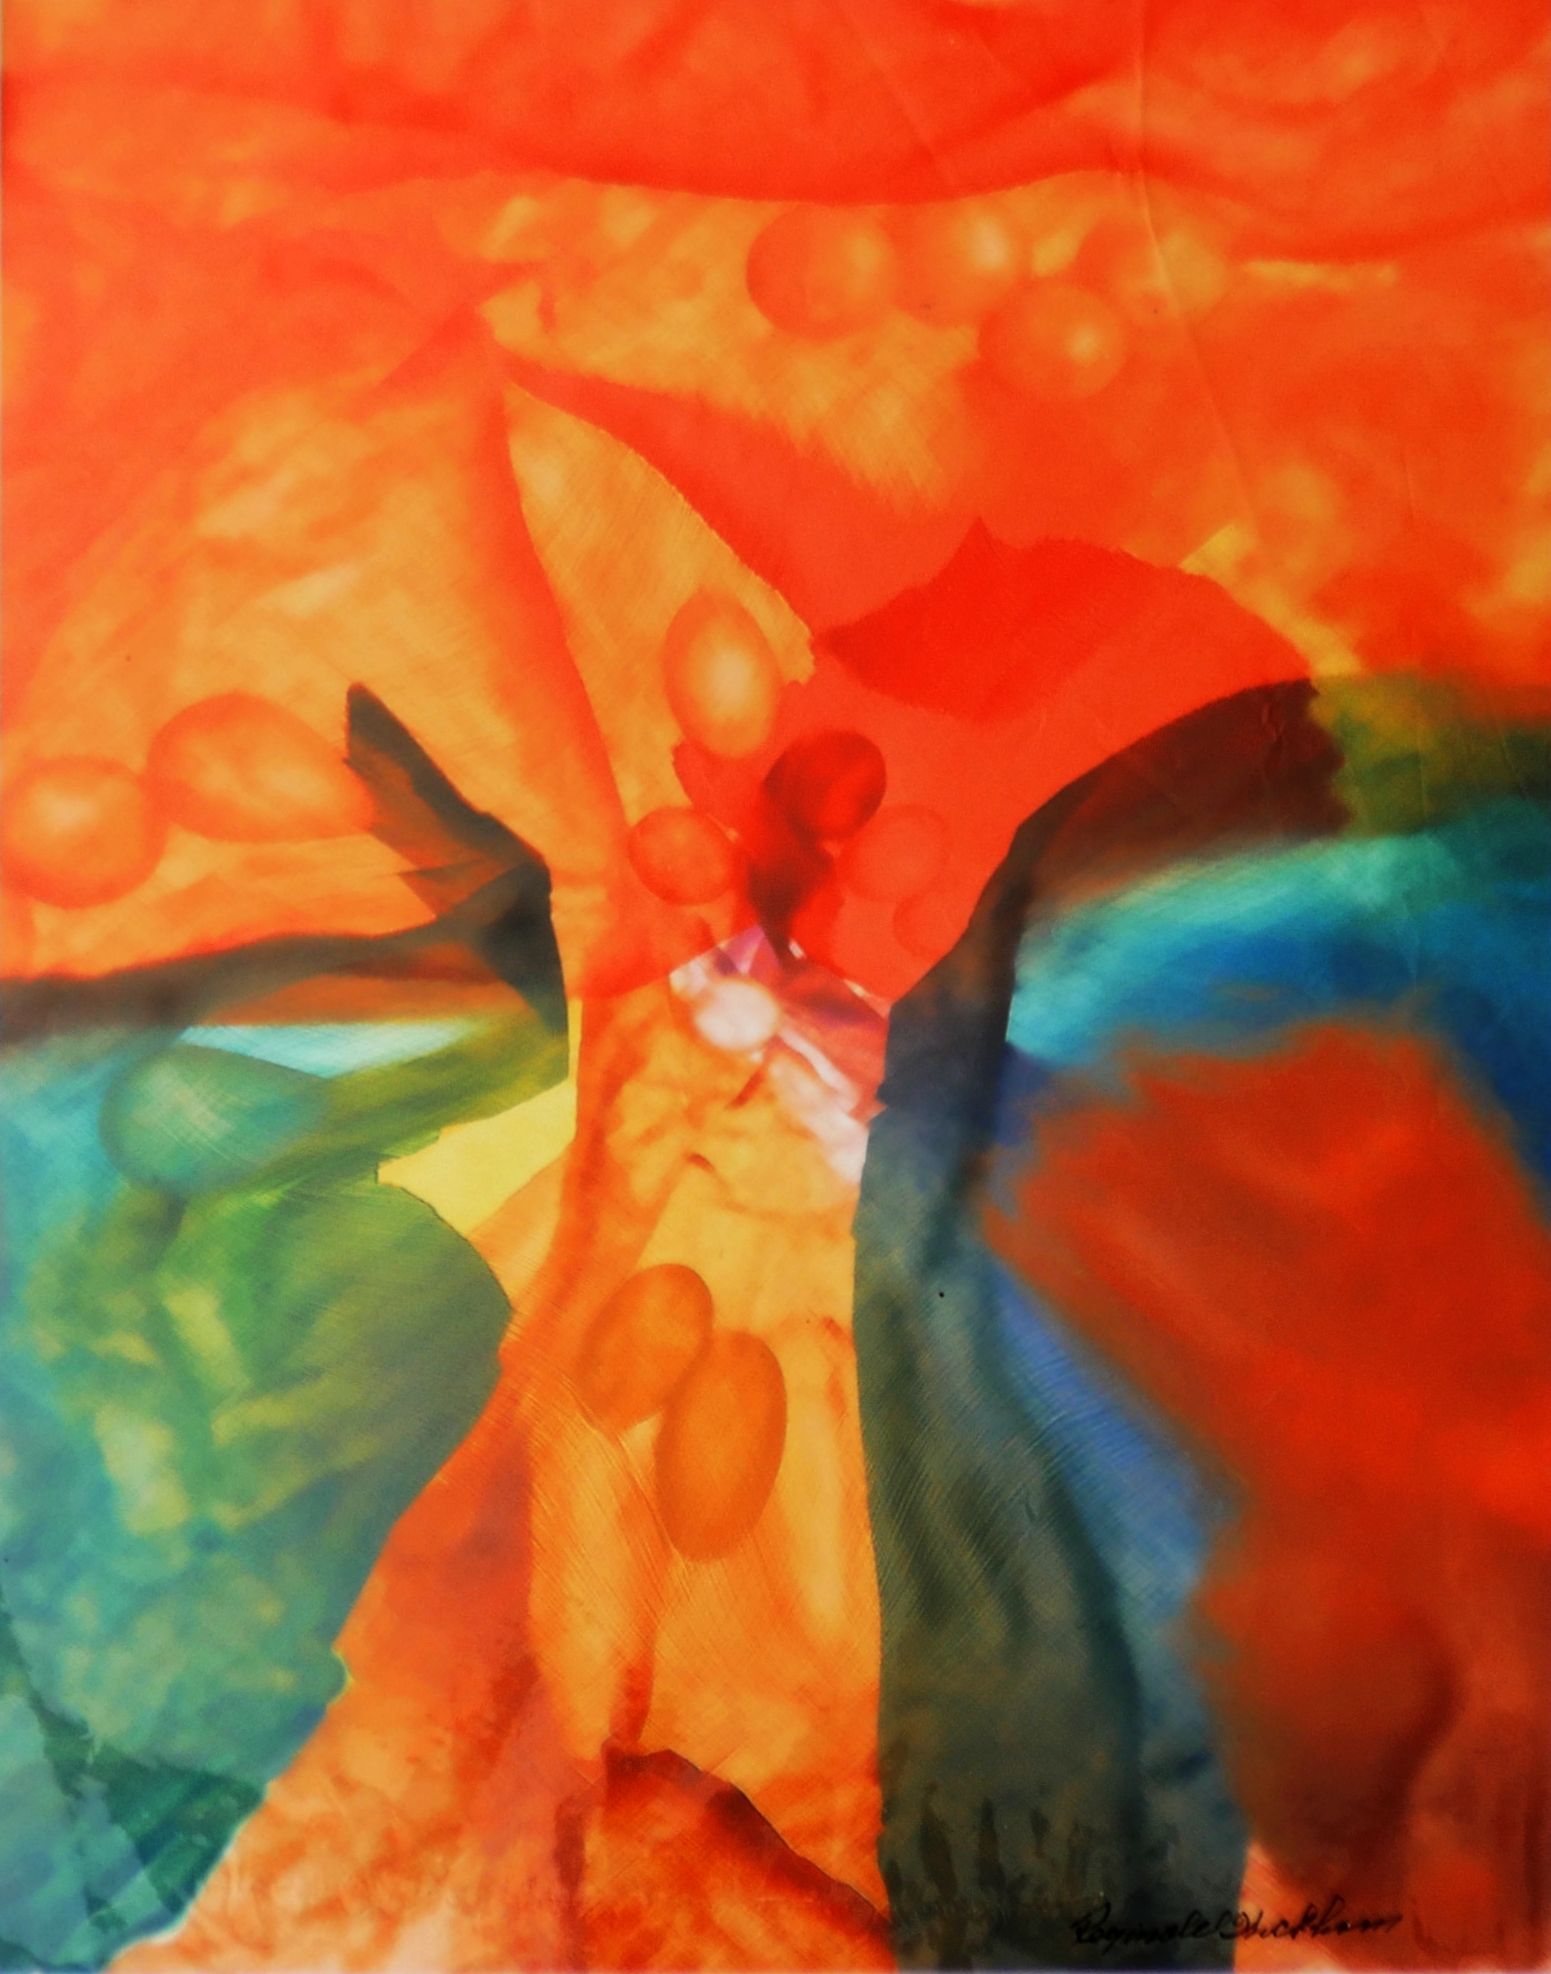 Abstract orange green and red photograph with water color characteristics